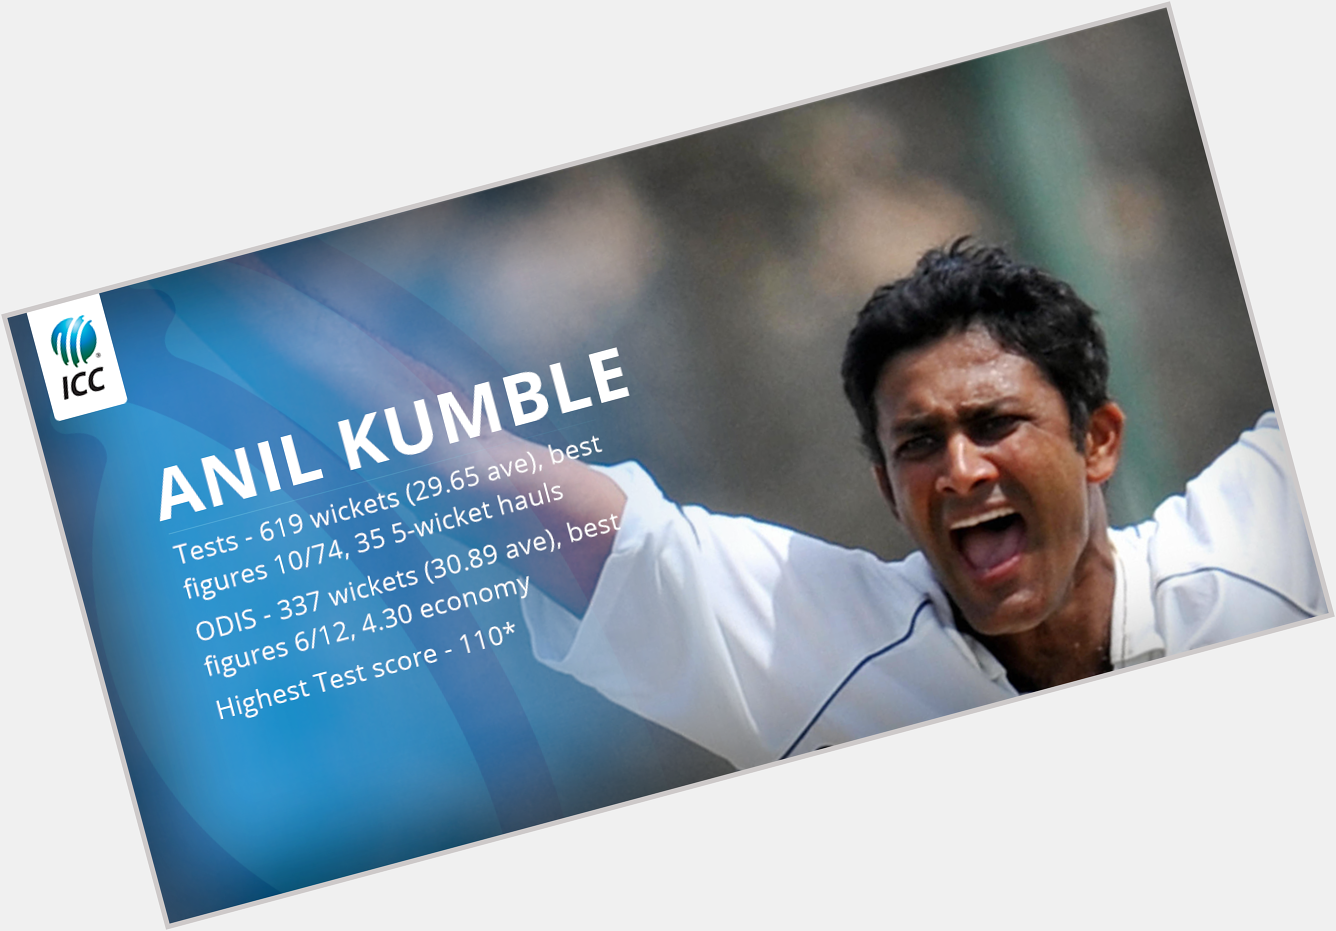 Happy Birthday to one of the greatest spin bowlers of all time,
\"Anil kumble\" 